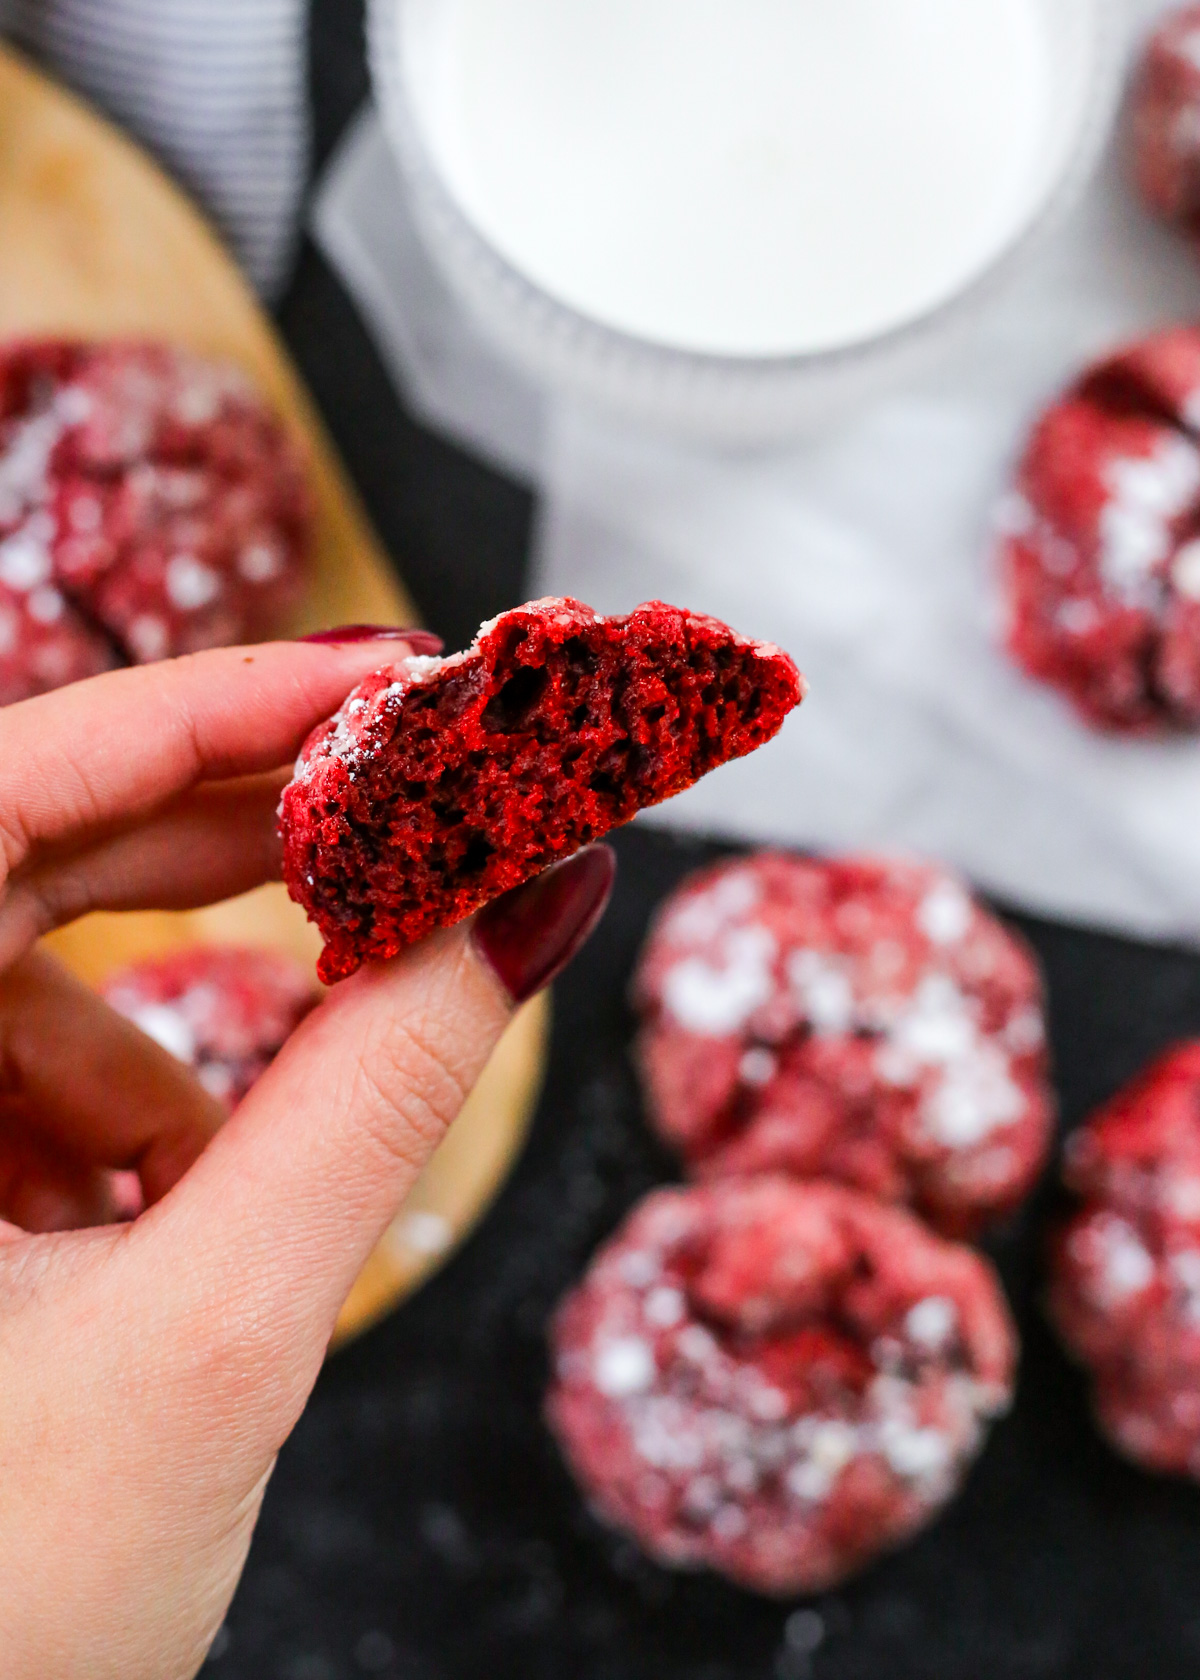 A woman's hand holds up a red velvet gooey butter cookie that's been folded and torn in half to display the inside of the cookie, which is vibrant red with a moist, cake-like consistency. The remaining cookies are visible in the background along with a glass of milk